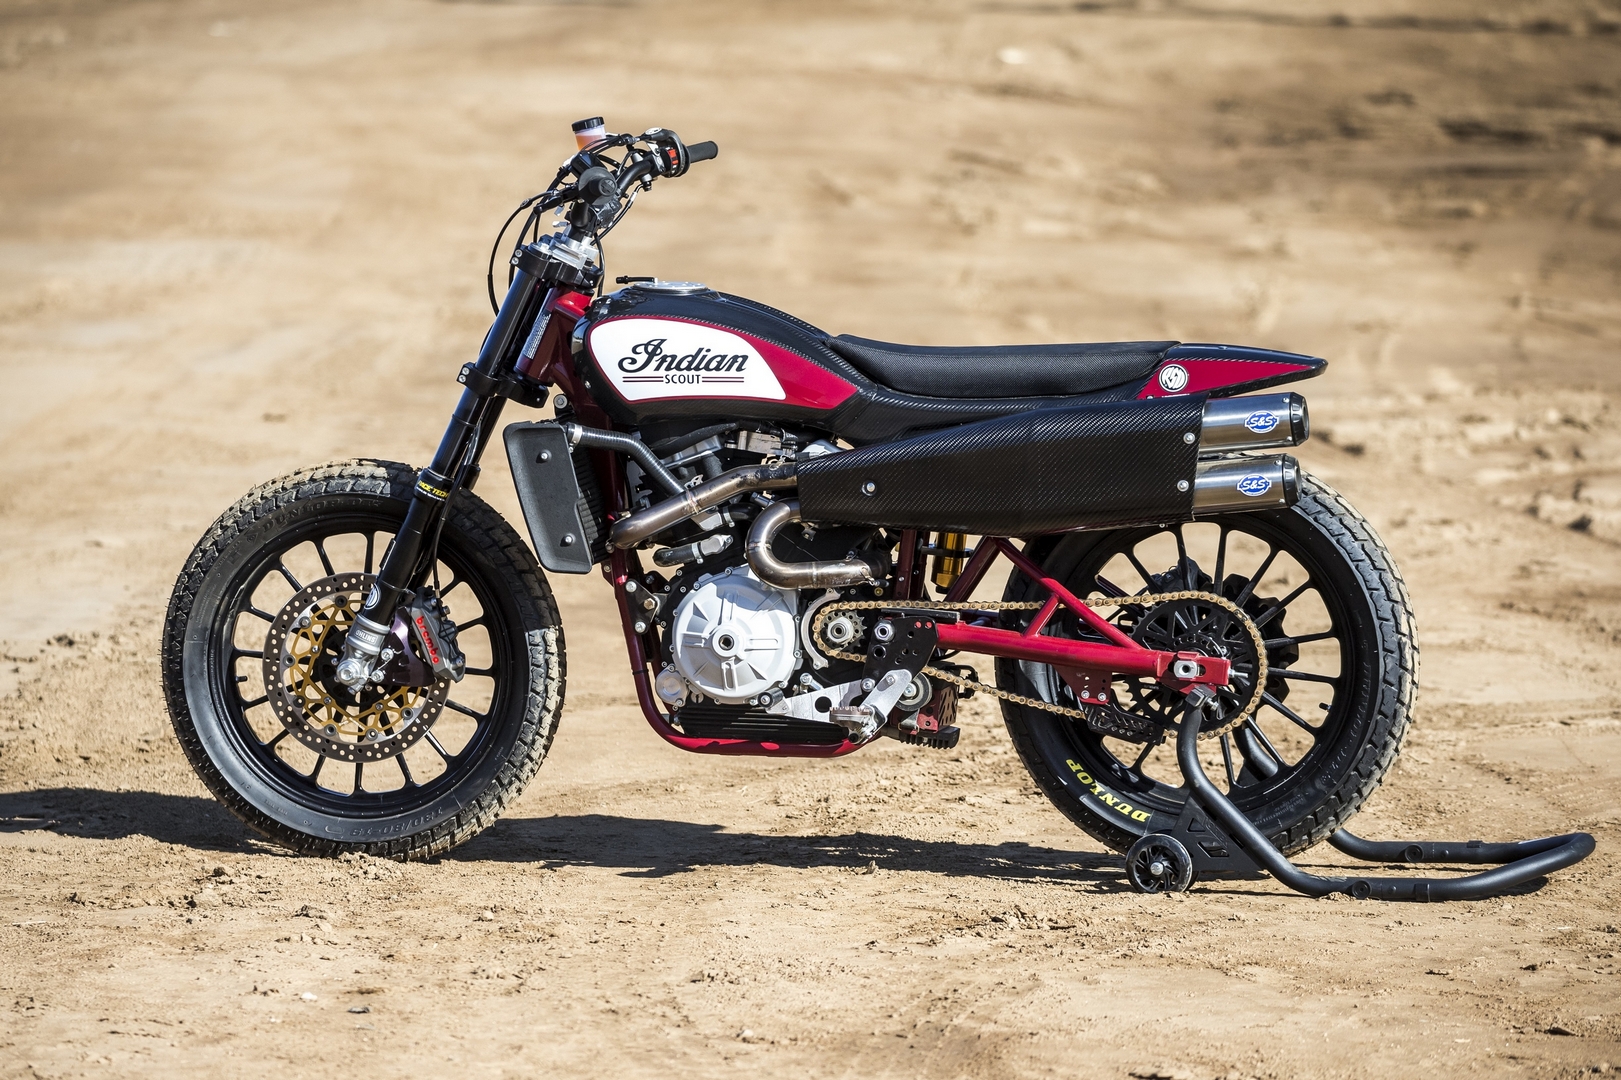 Travis Pastrana Jumps Indian Scout Ftr750 At Evel Live In July Drivemag Riders